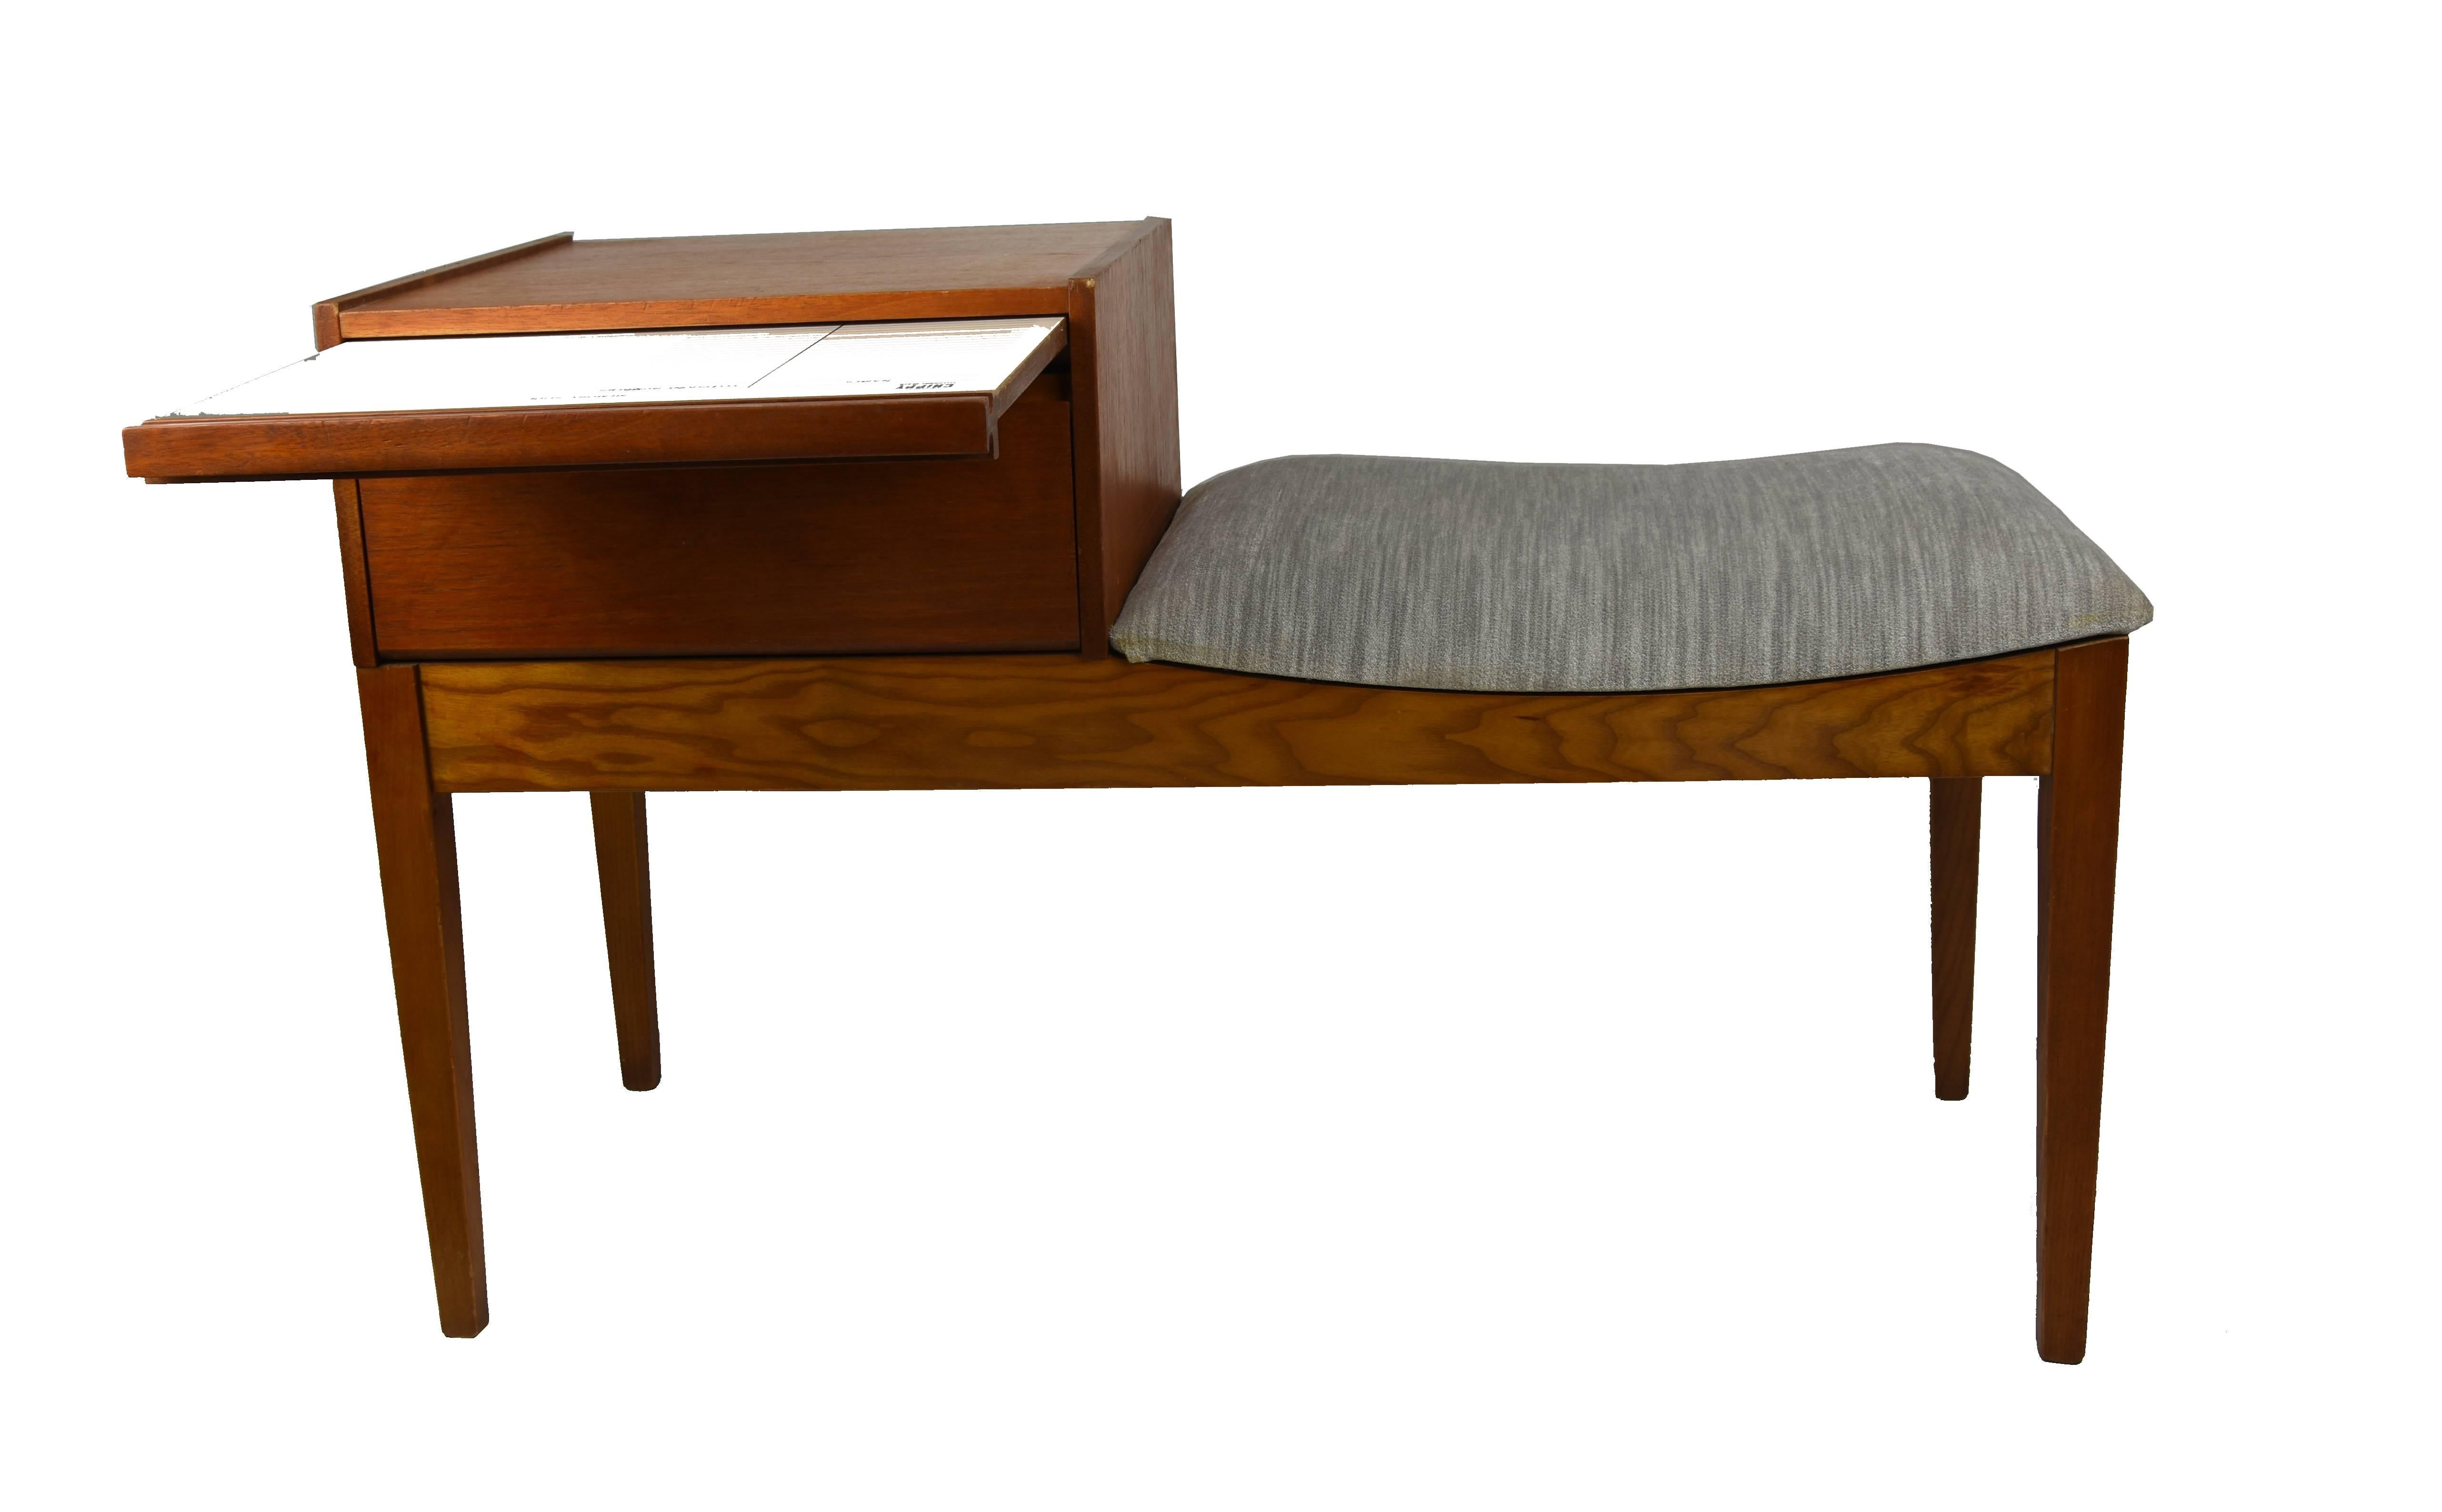 A unique and very well made telephone bench in teak, this was made by Chippy Heath and it dates from the 1960s-1970s. The condition is superb for its age, the grey crush velvet fabric upholstery is new, the frame is nicely polished, sturdy and